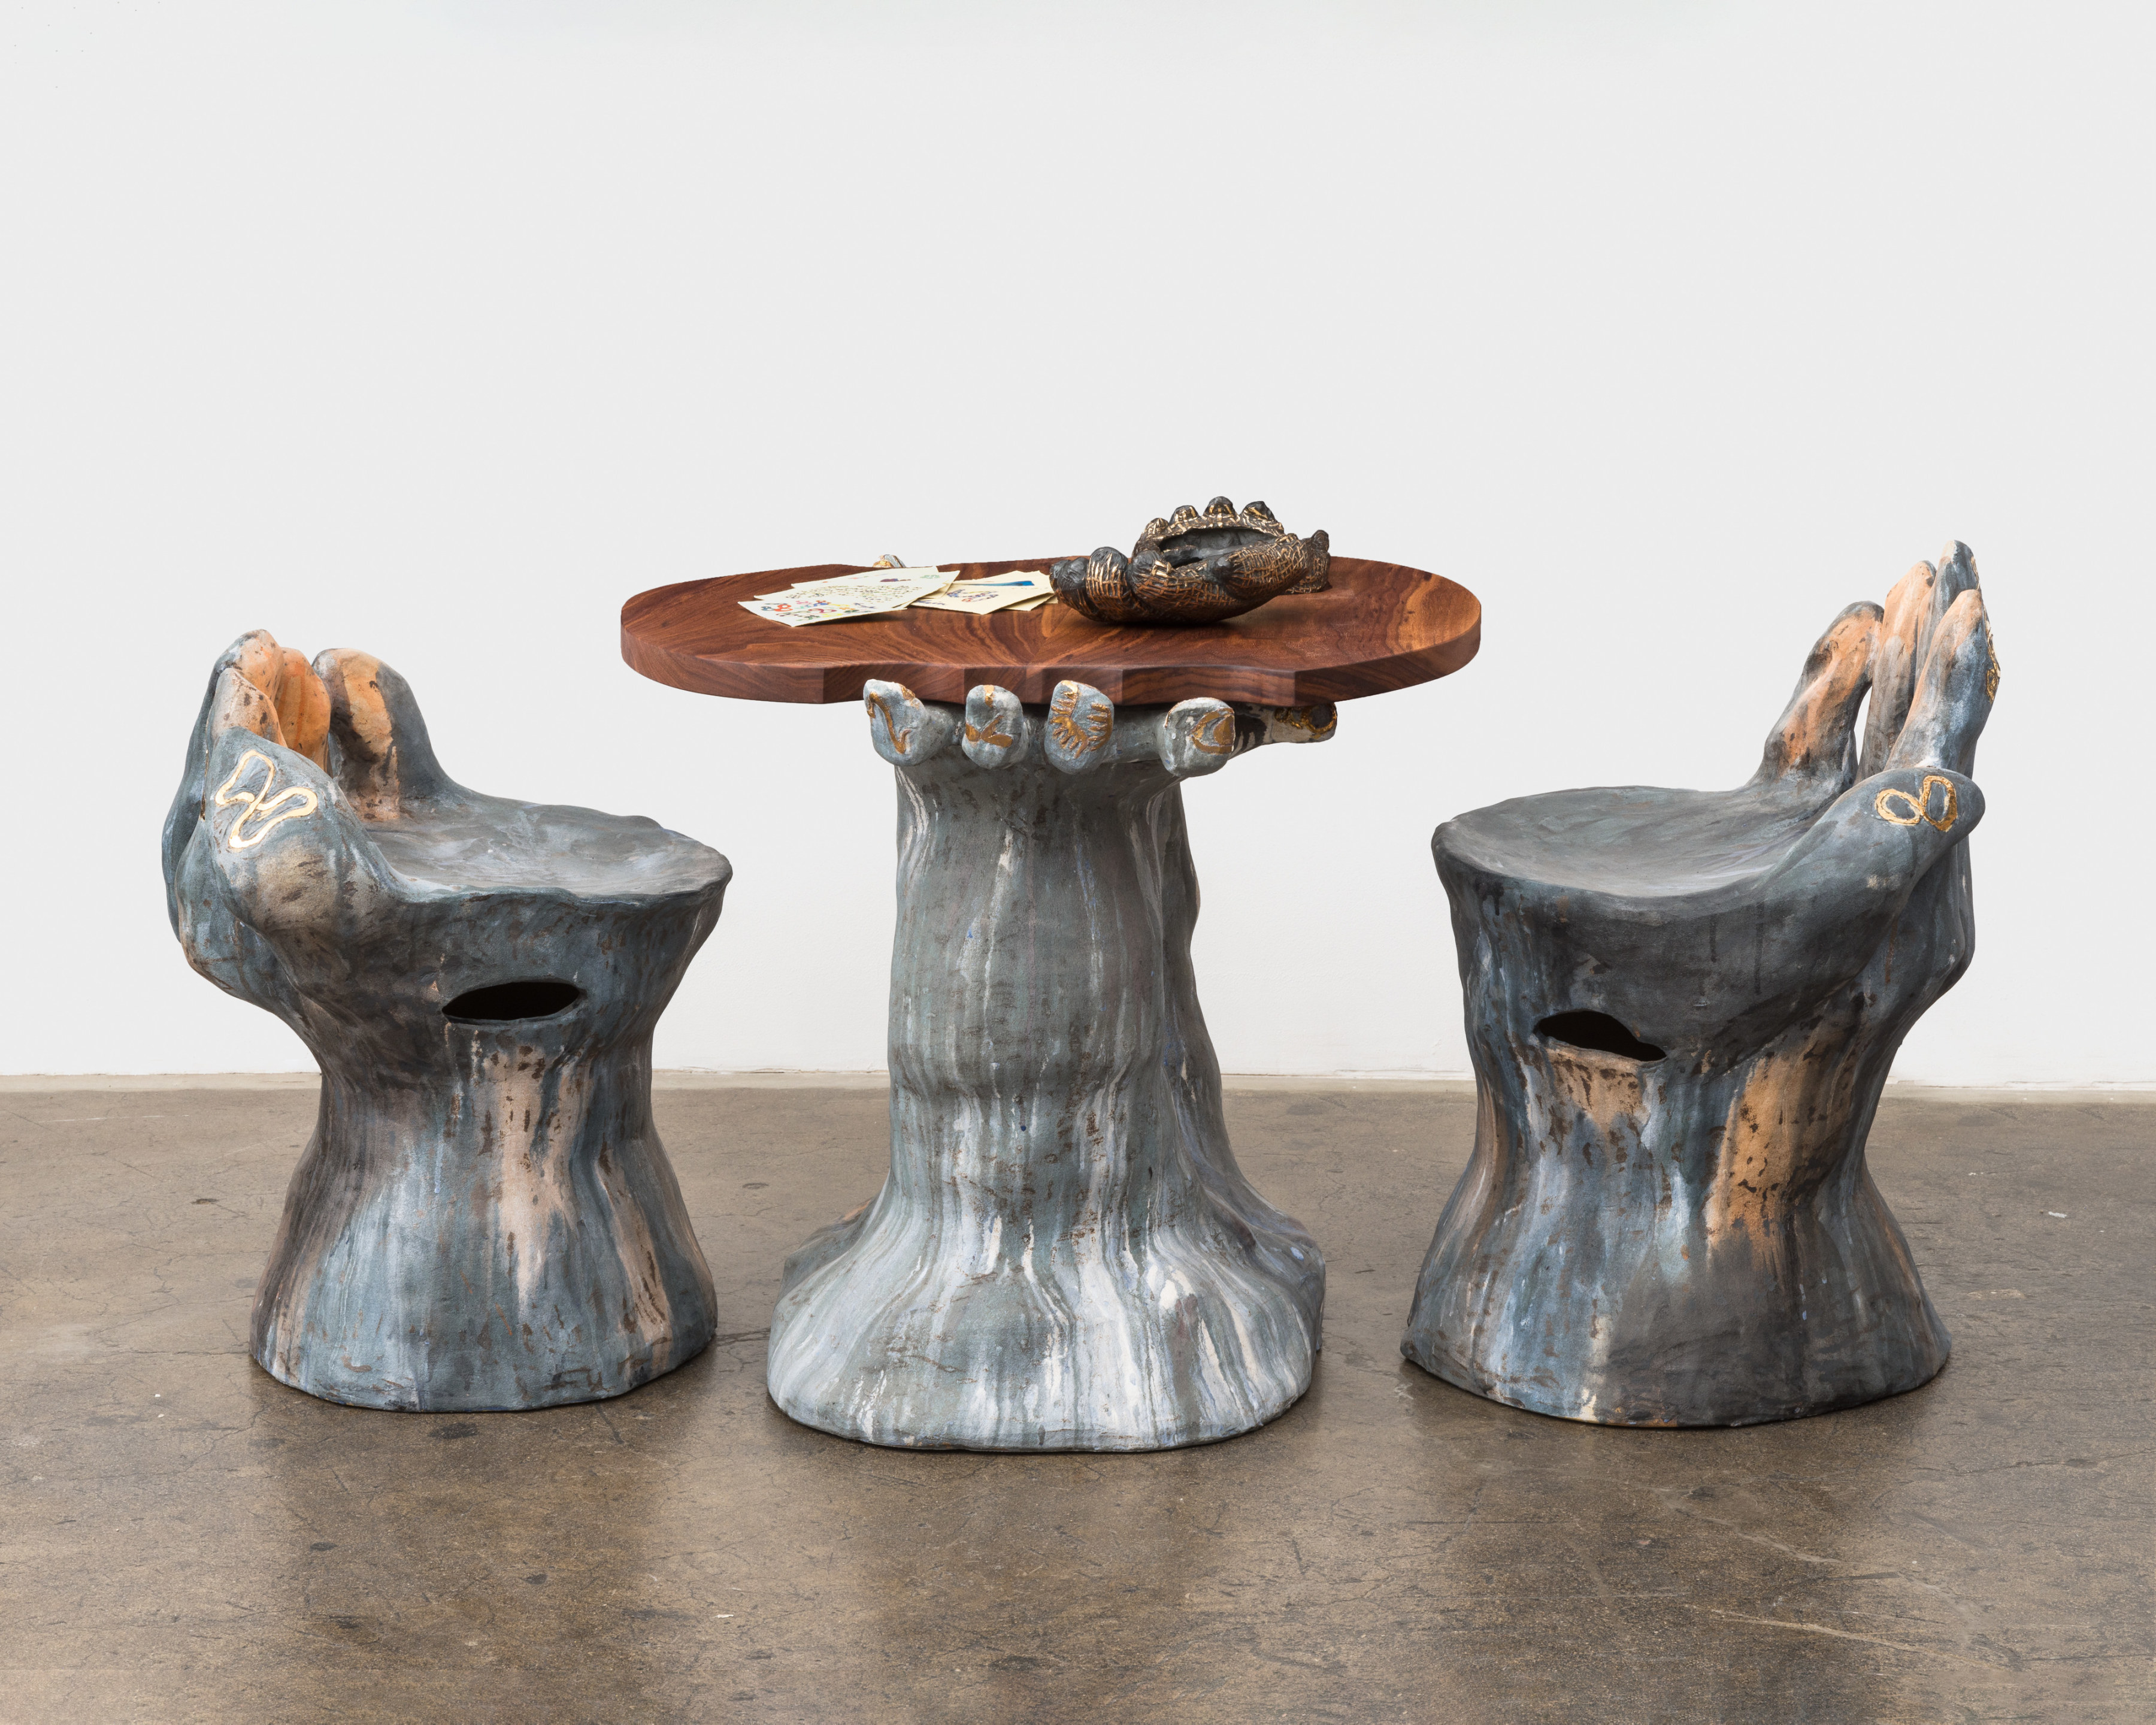 A three piece ceramic sculpture which includes two large grey and pink glazed hand shaped chairs and a walnut table top held by two ceramic hands.